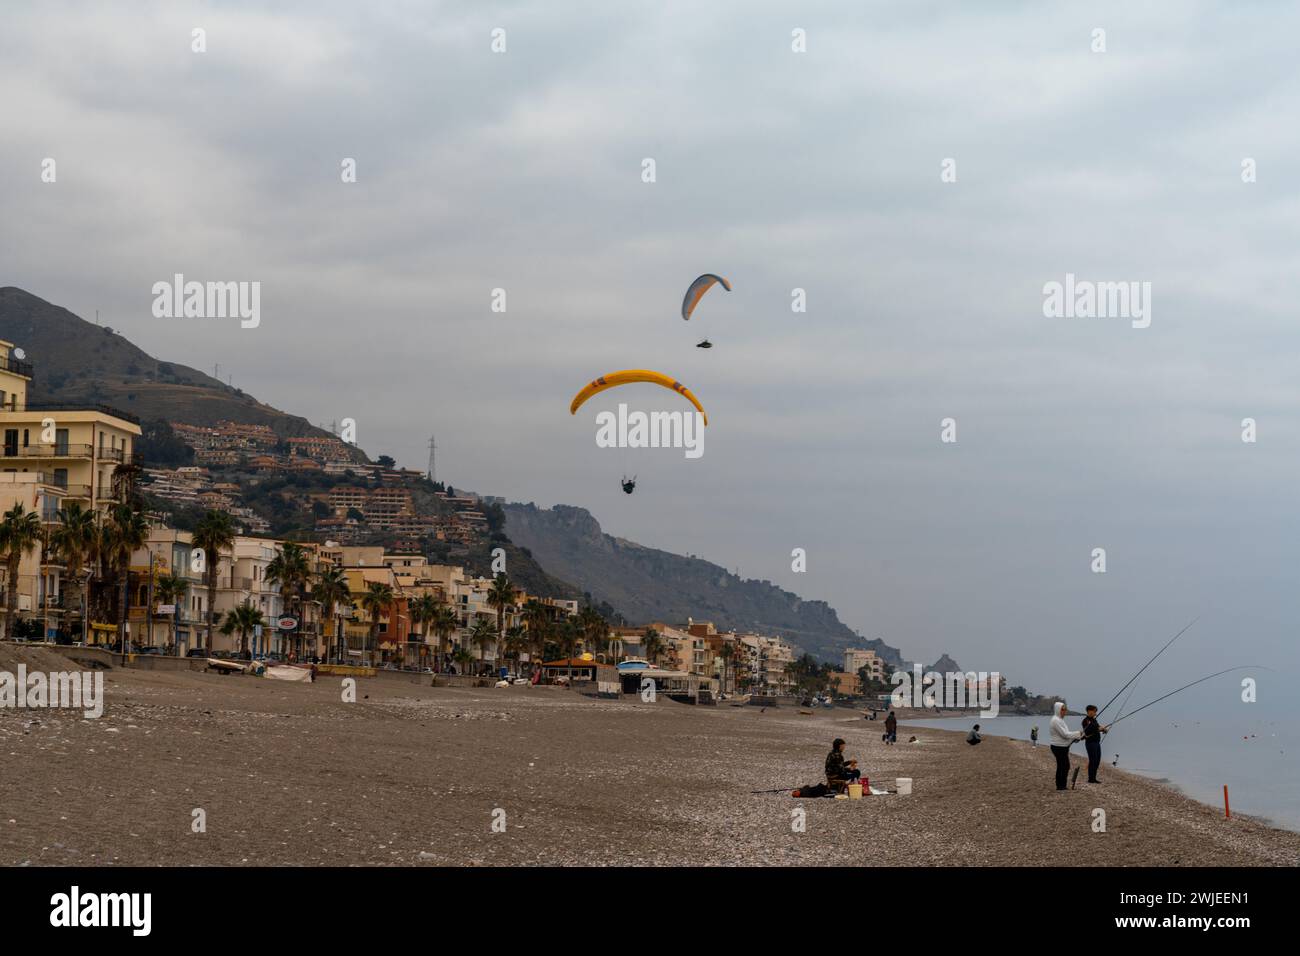 Letojanni, Italy - 29 January, 2023: fishermen on the beach at Letojanni with paragliders landing behind them after a flight from the Sicilian mountai Stock Photo